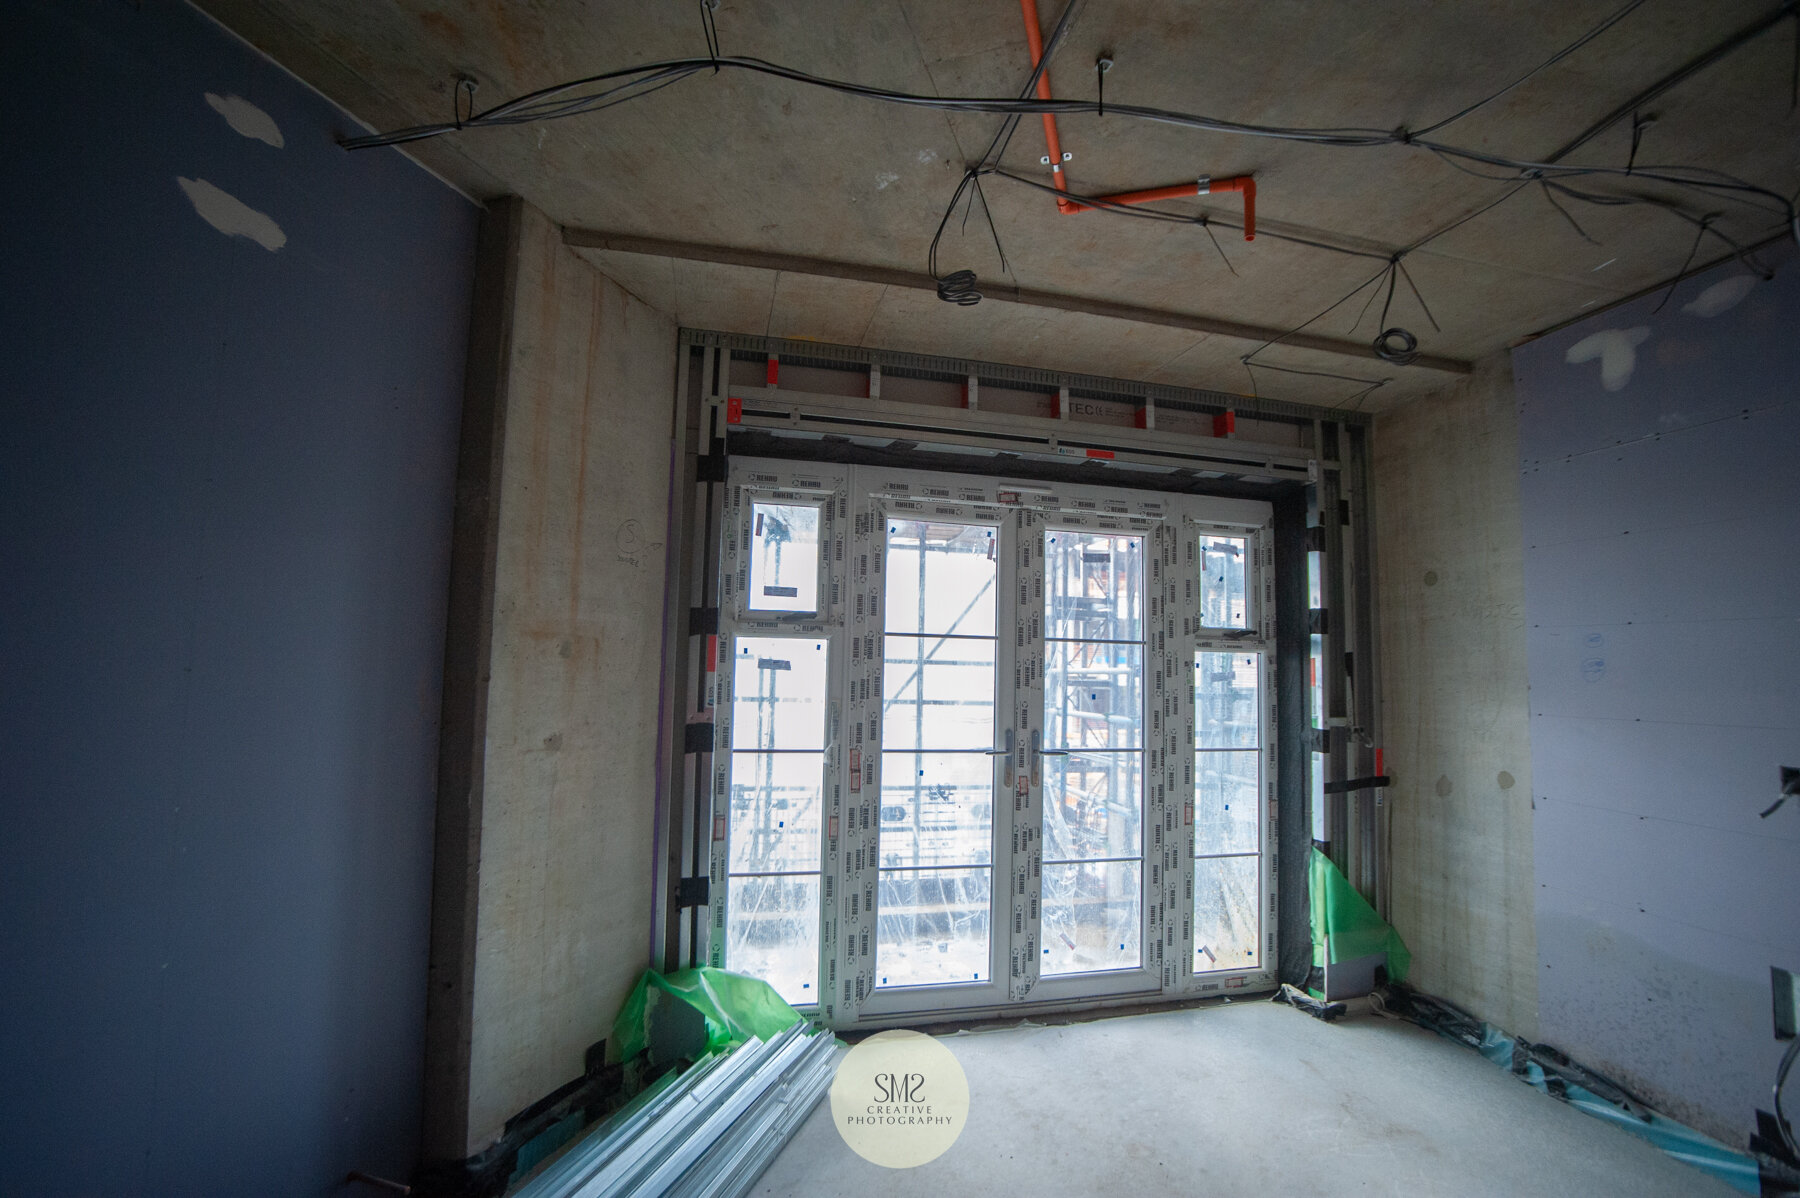  Inside one of the flats showing wiring and sprinkler pipes on the ceiling. 